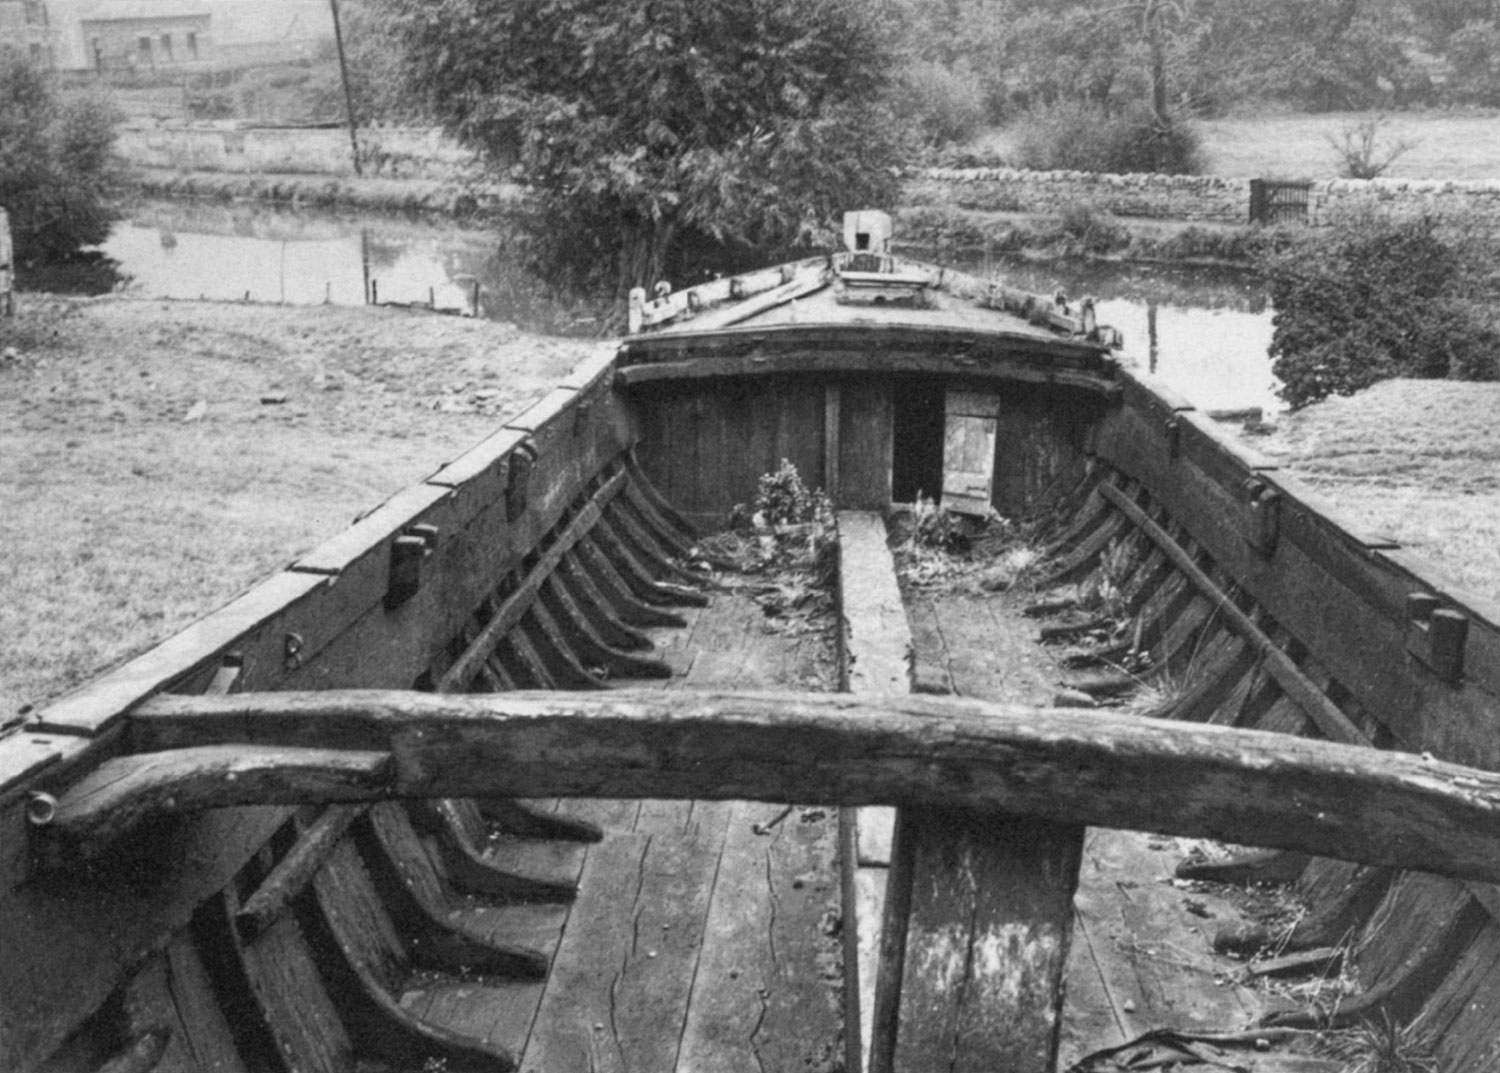 Barge Perseverance dumped at Ryeford.